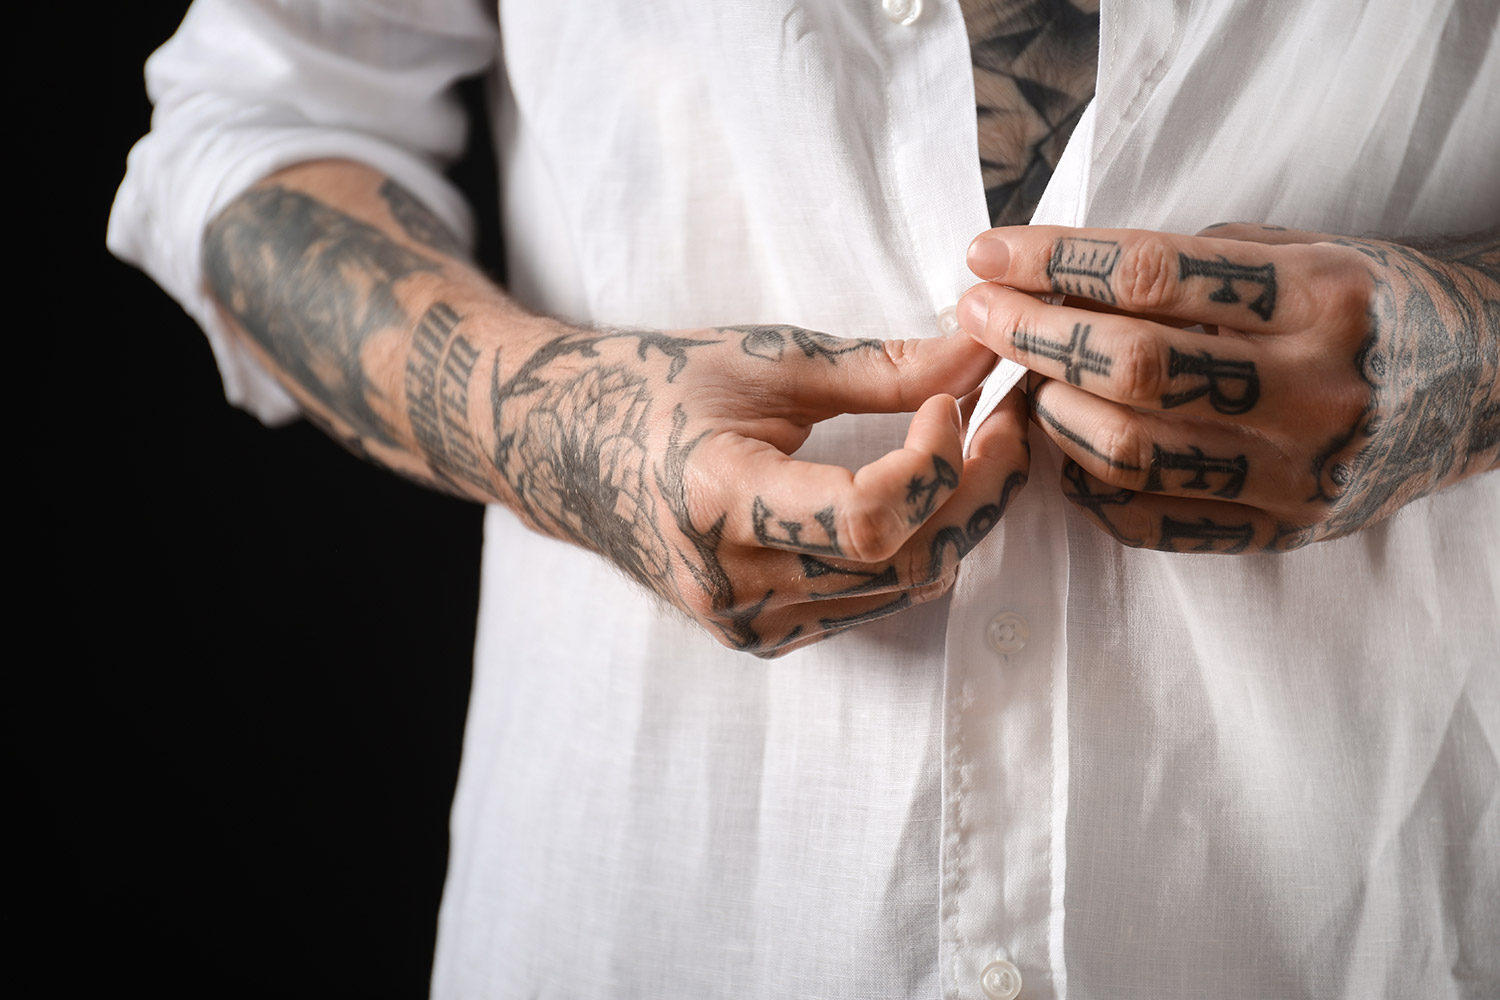 100 Trendy Hand Tattoos To Inspire You  Women  Men  The Trend Scout